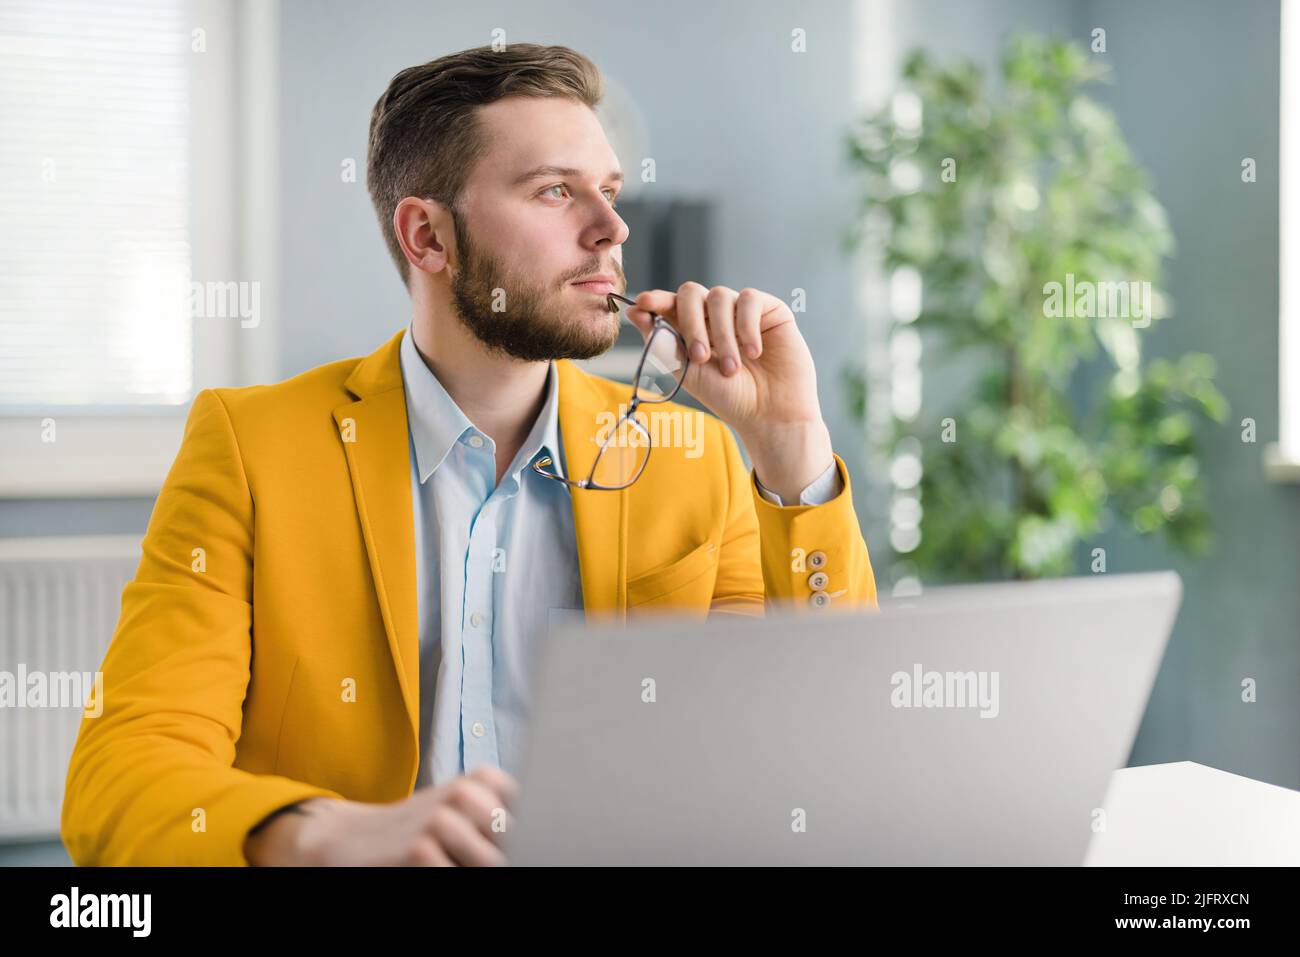 Pensive office worker with laptop Stock Photo